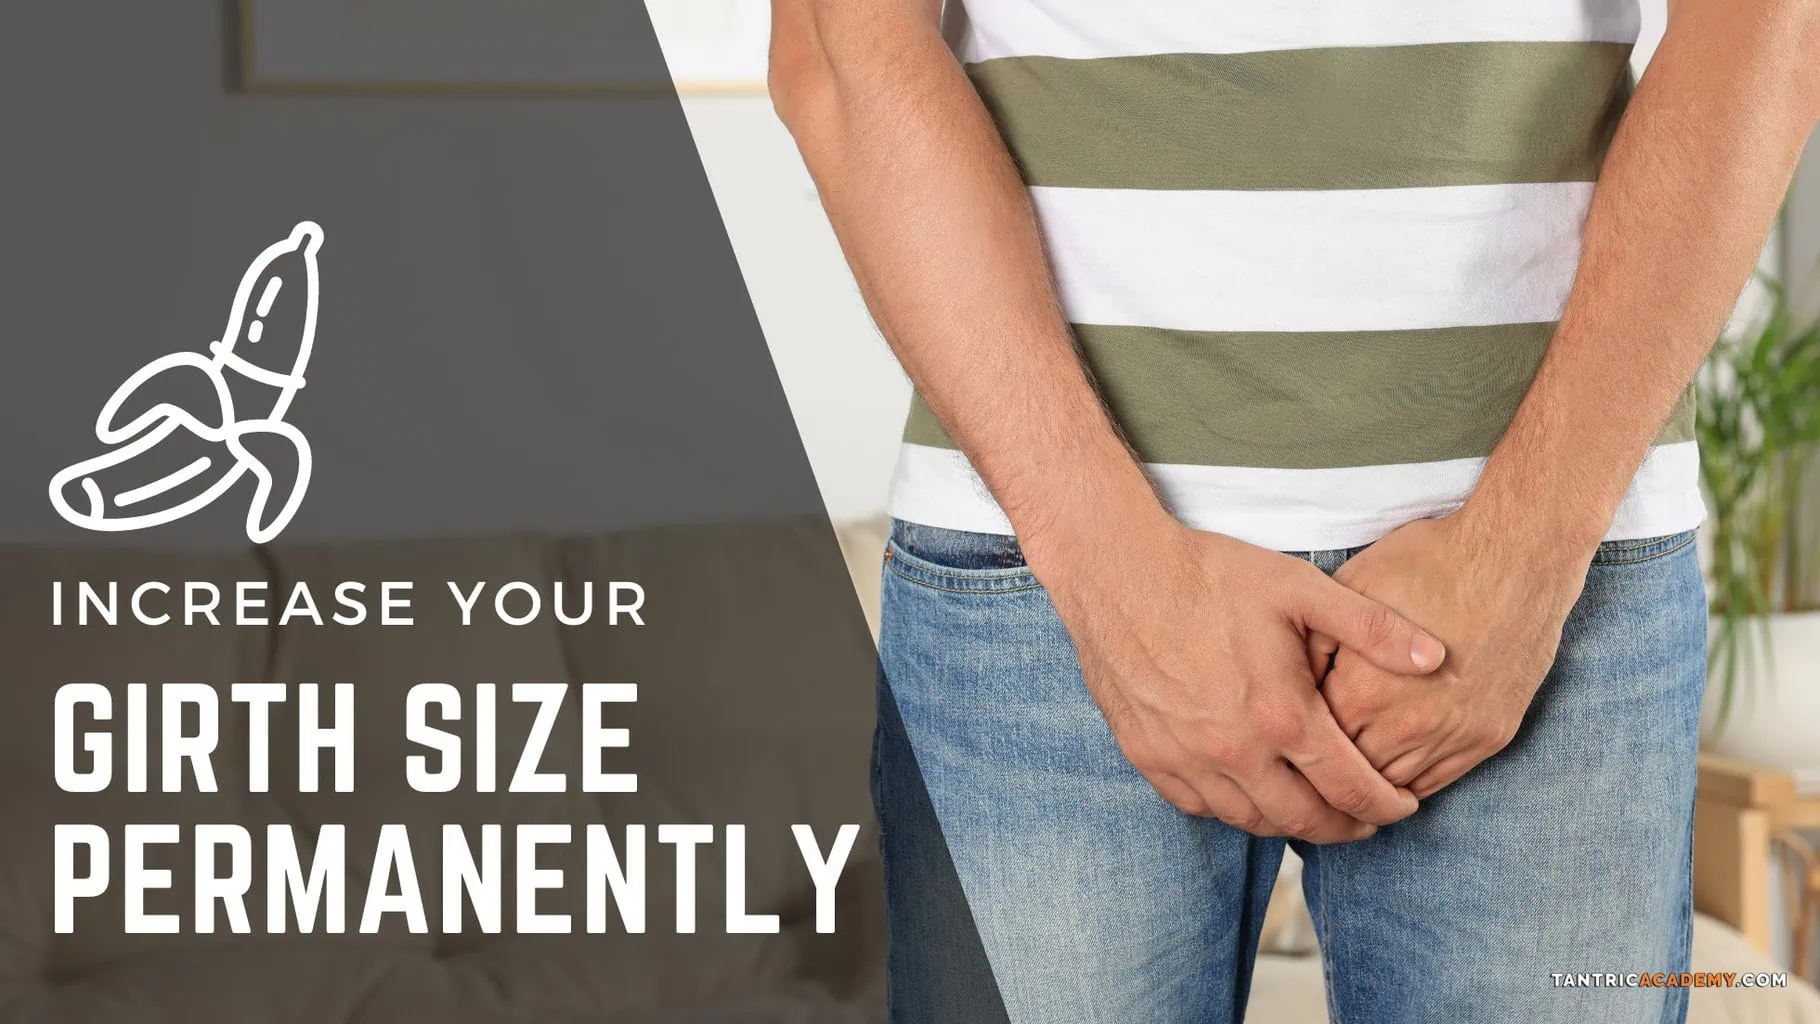 How To Increase Girth Size Permanently: 5 Effective Ways